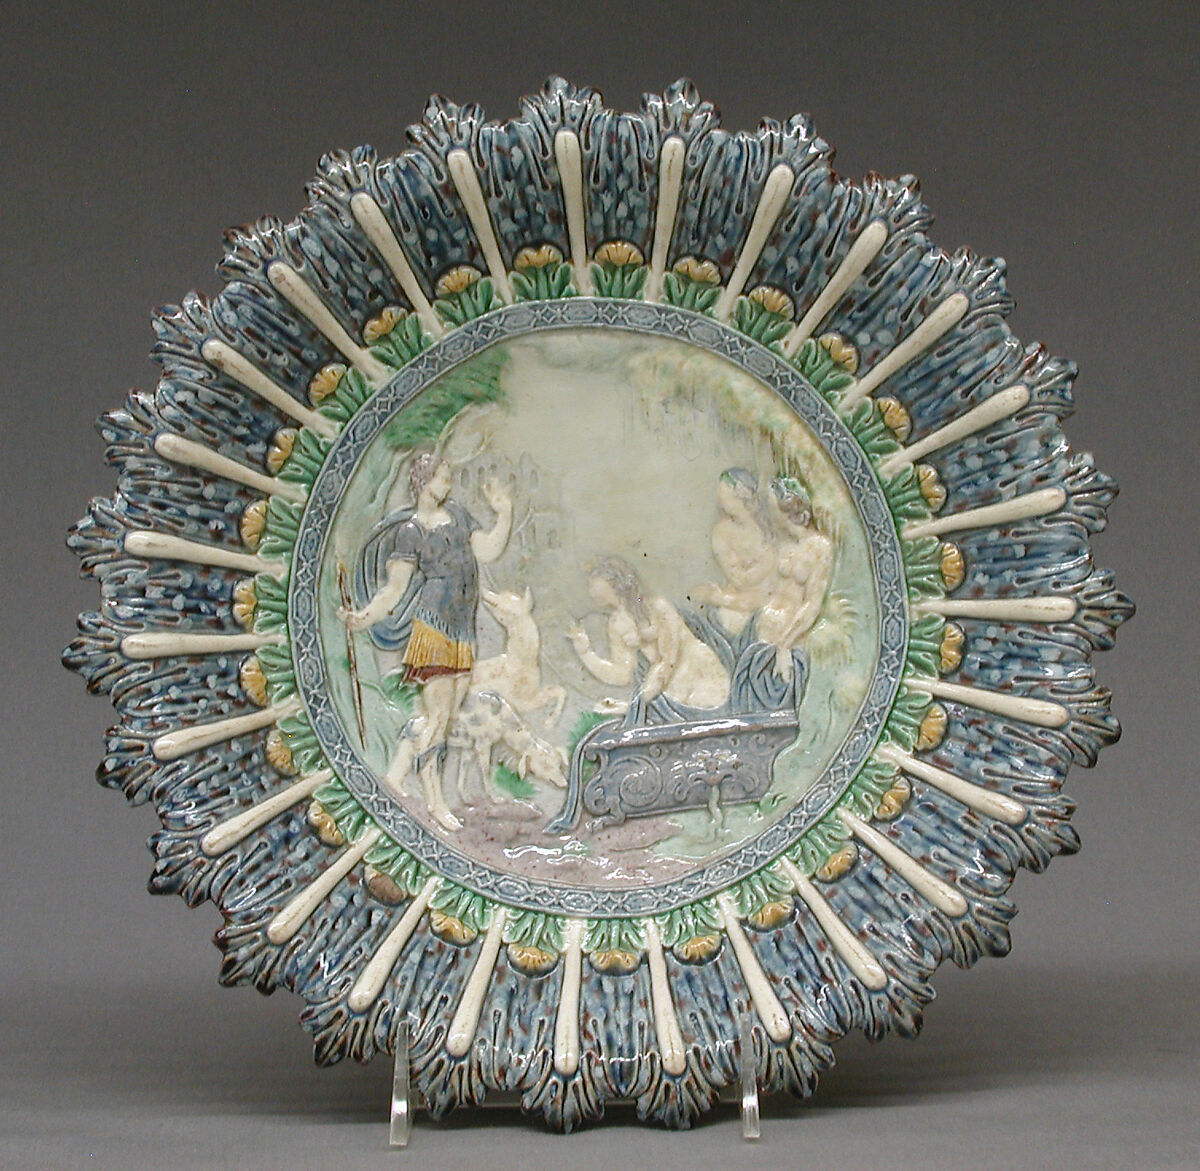 Dish with Acteon changed into a stag by Diana, Manner of Bernard Palissy (French, Agen, Lot-et-Garonne 1510–1590 Paris), Lead-glazed earthenware, French, possibly Normandy 